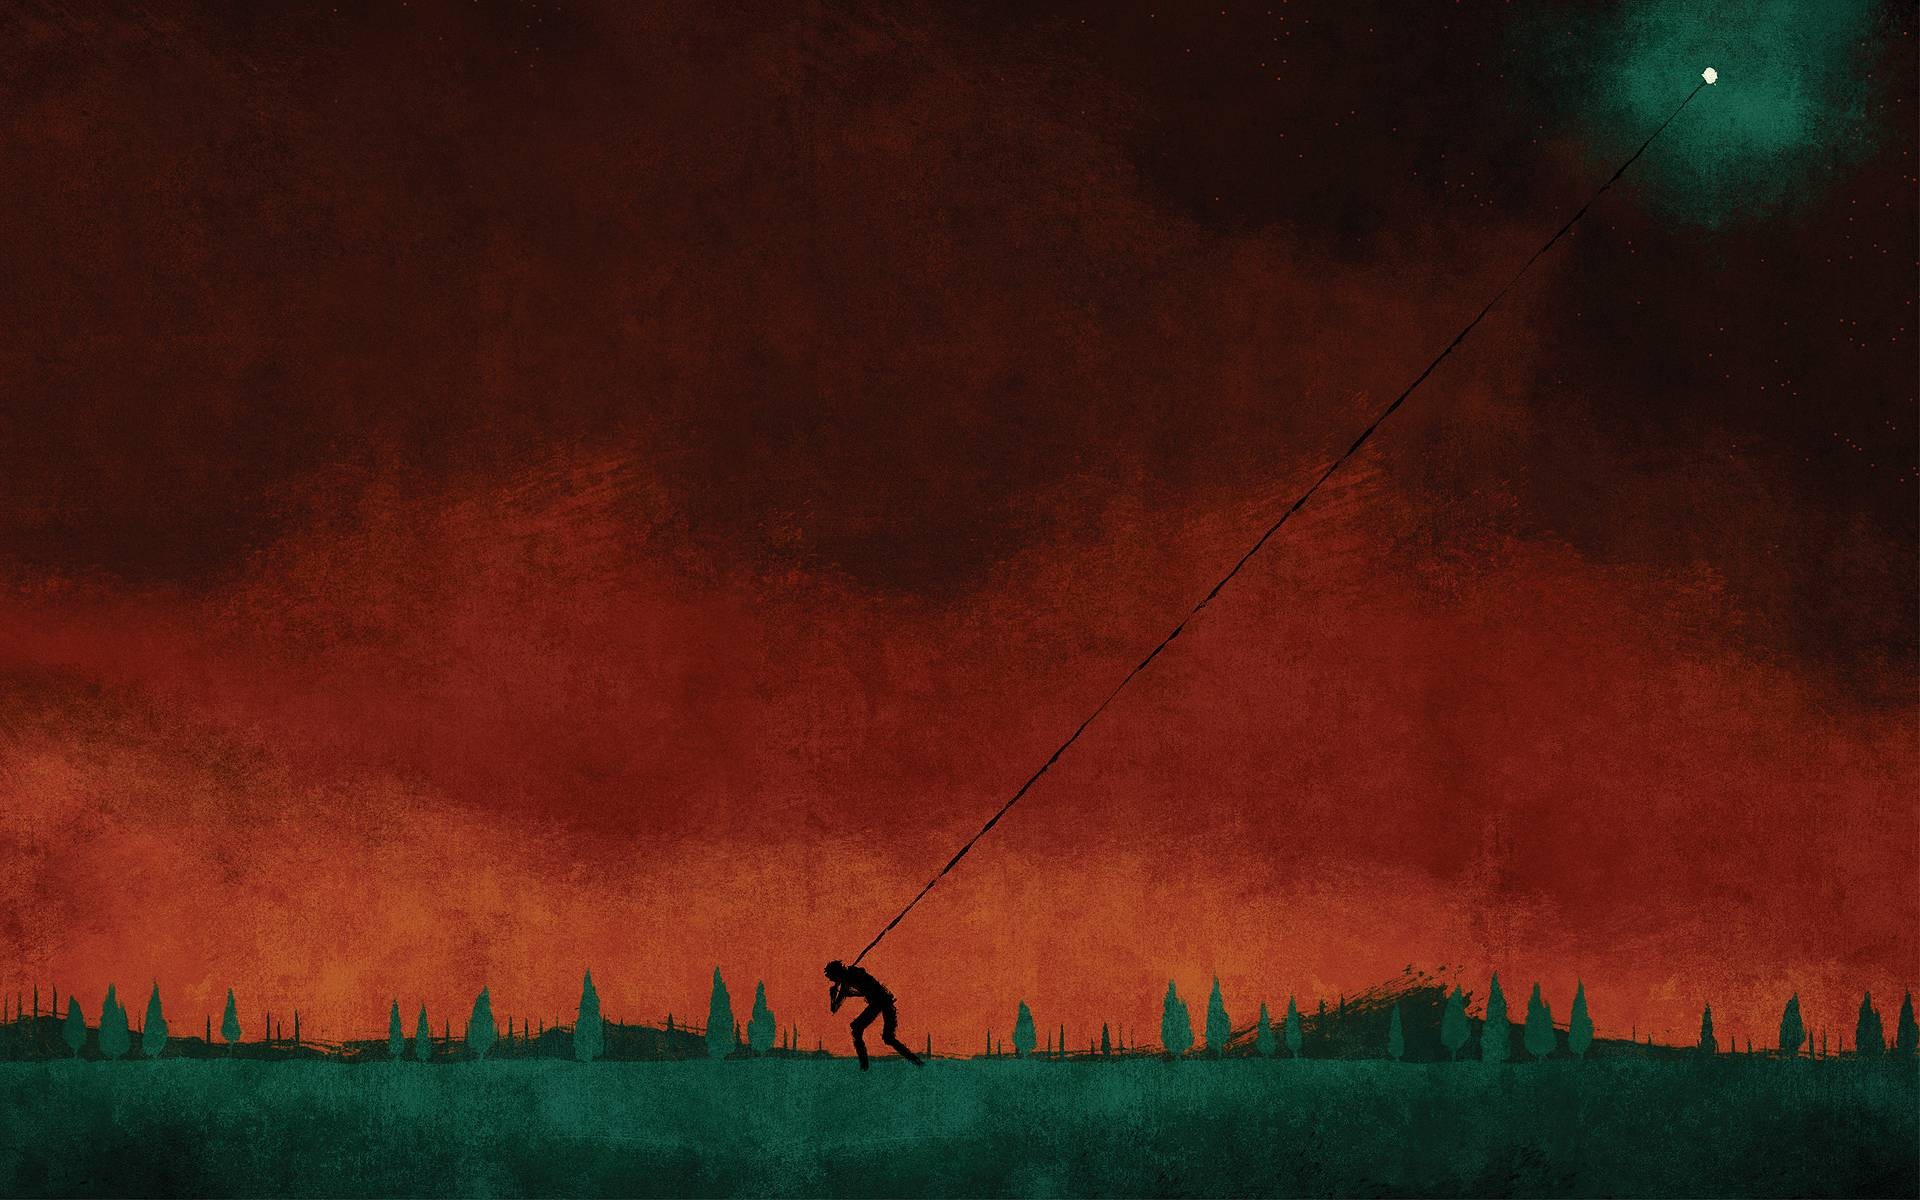 August Burns Red Moon August Burns Red Digital Art People Painting Artwork Silhouette Nature Field A 1920x1200